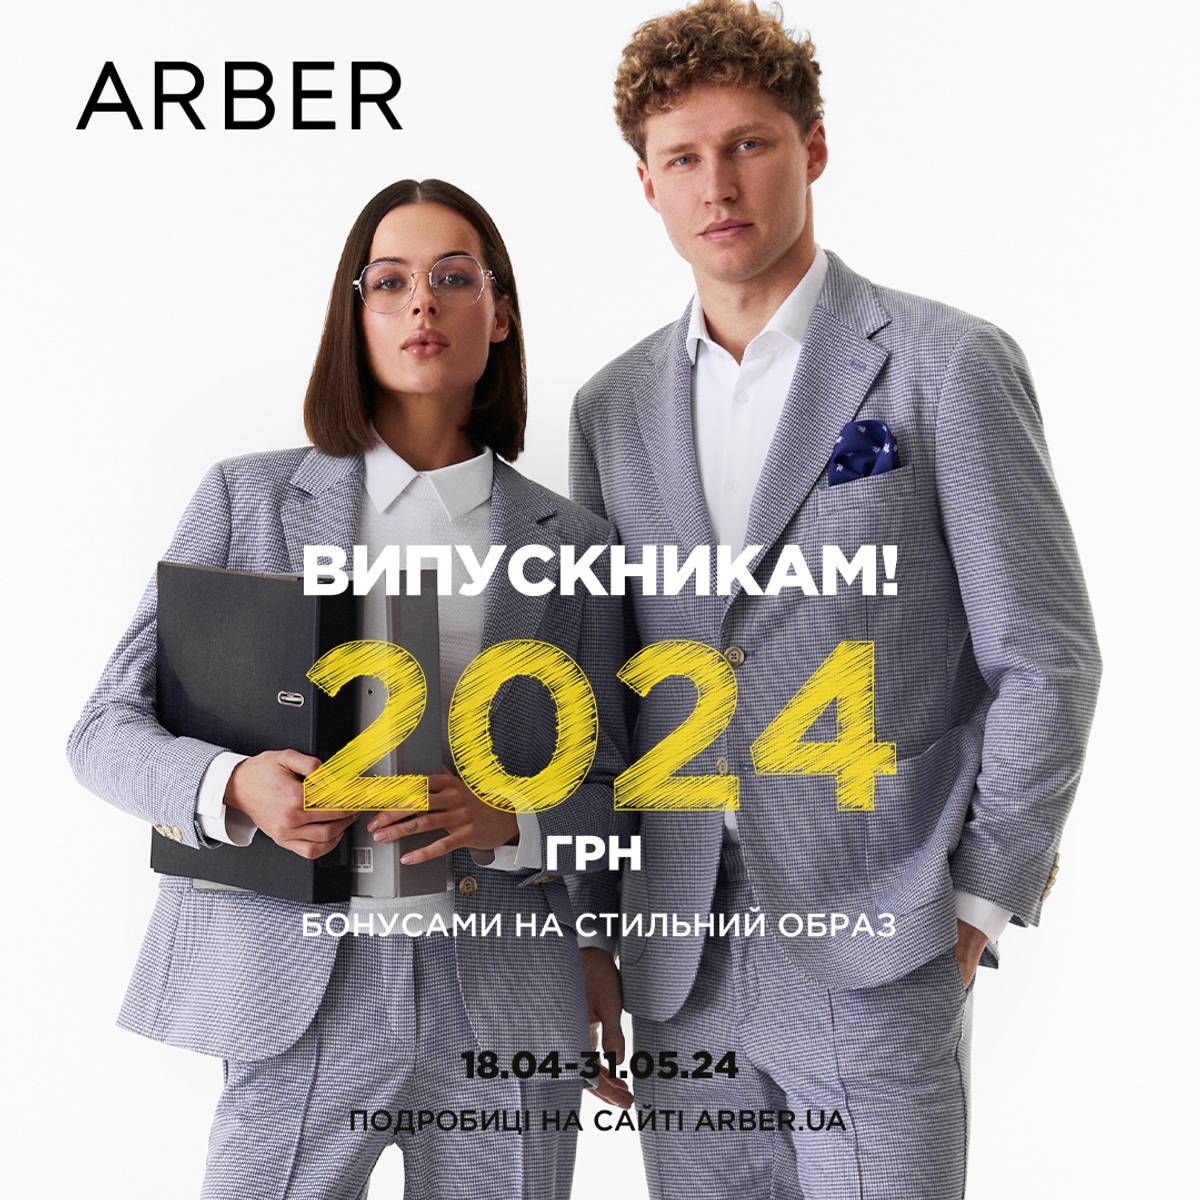 Promotion for graduates from ARBER